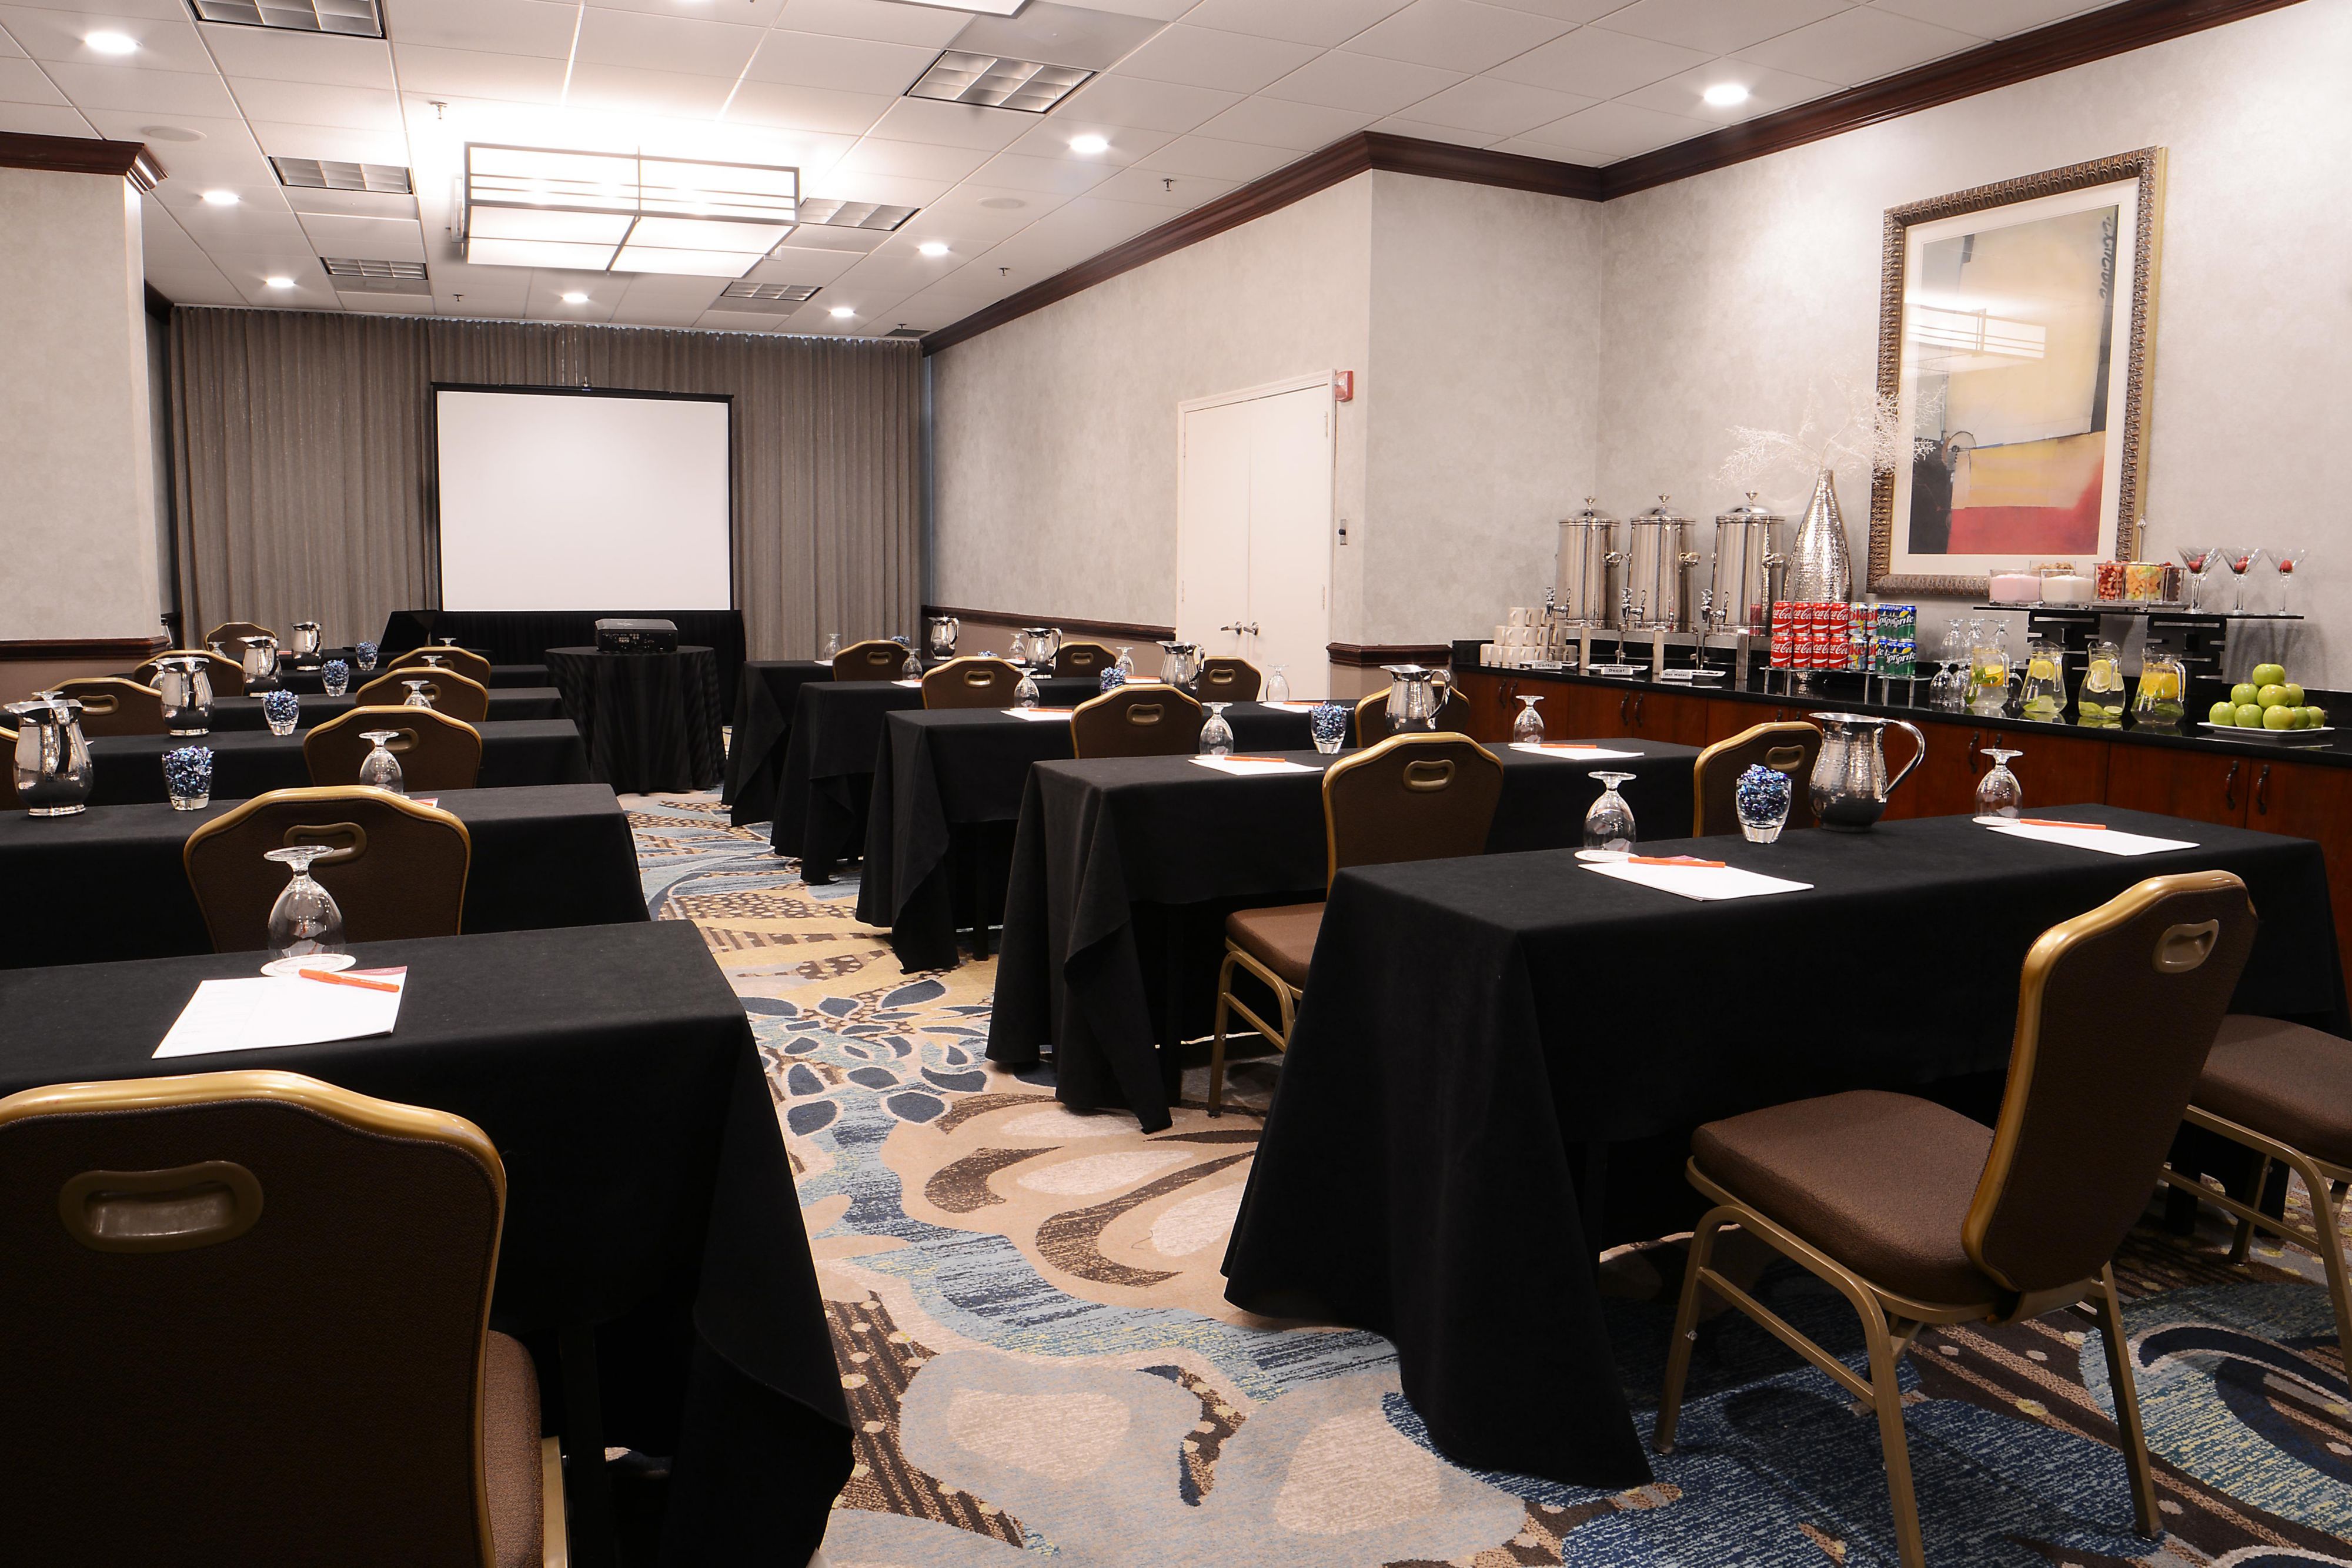 The Alexandria meeting space, great for your next corporate event!